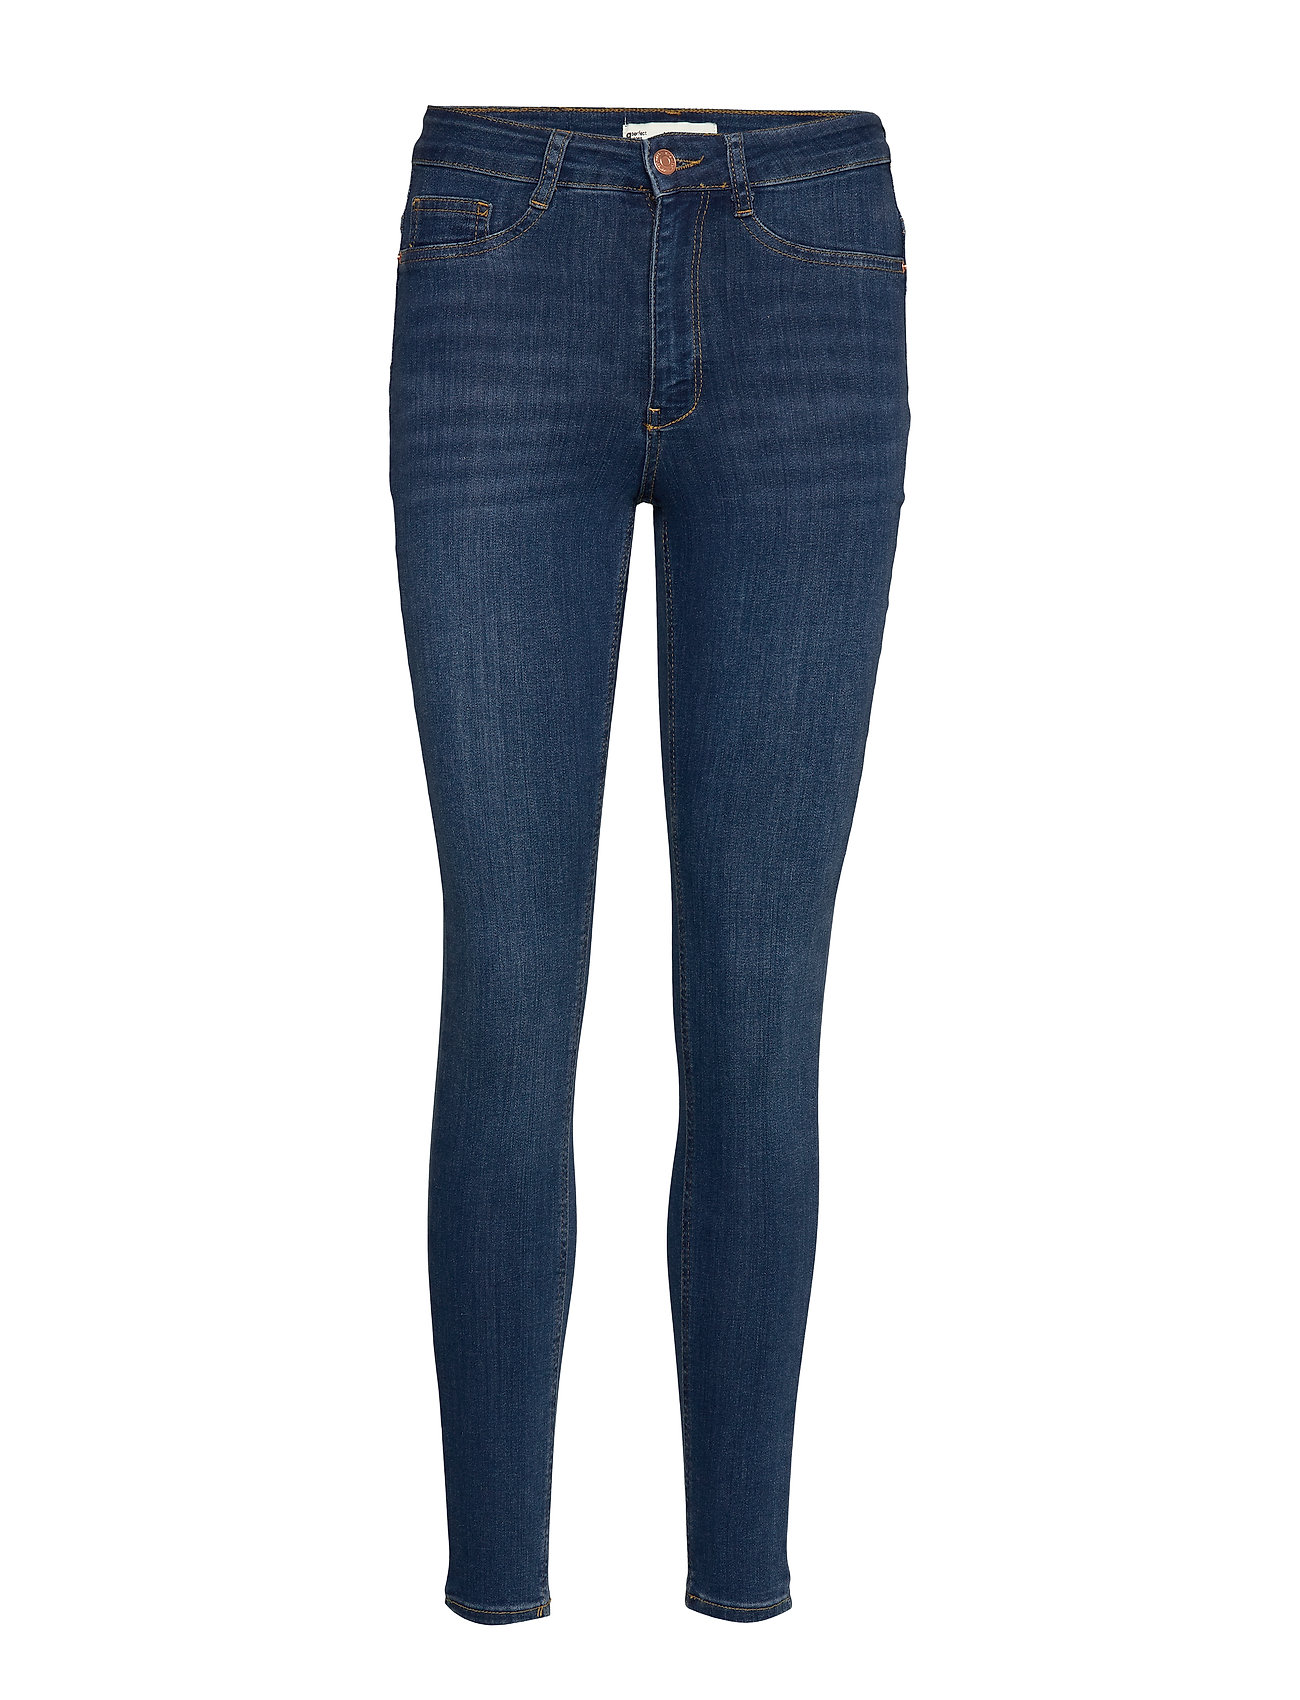 Jeans - clothing and fashion online - Gina Tricot